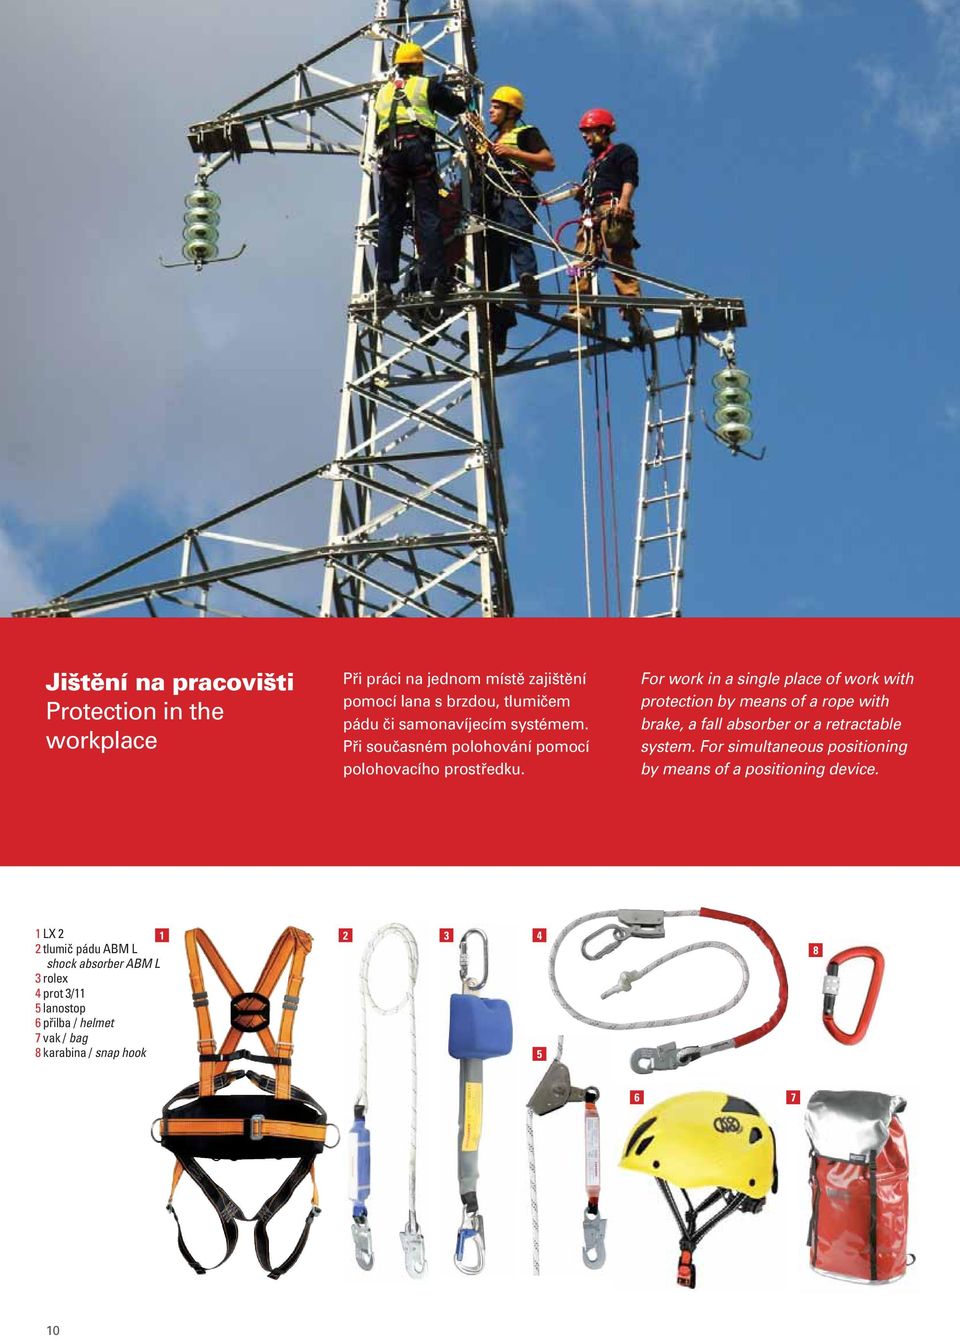 For work in a single place of work with protection by means of a rope with brake, a fall absorber or a retractable system.